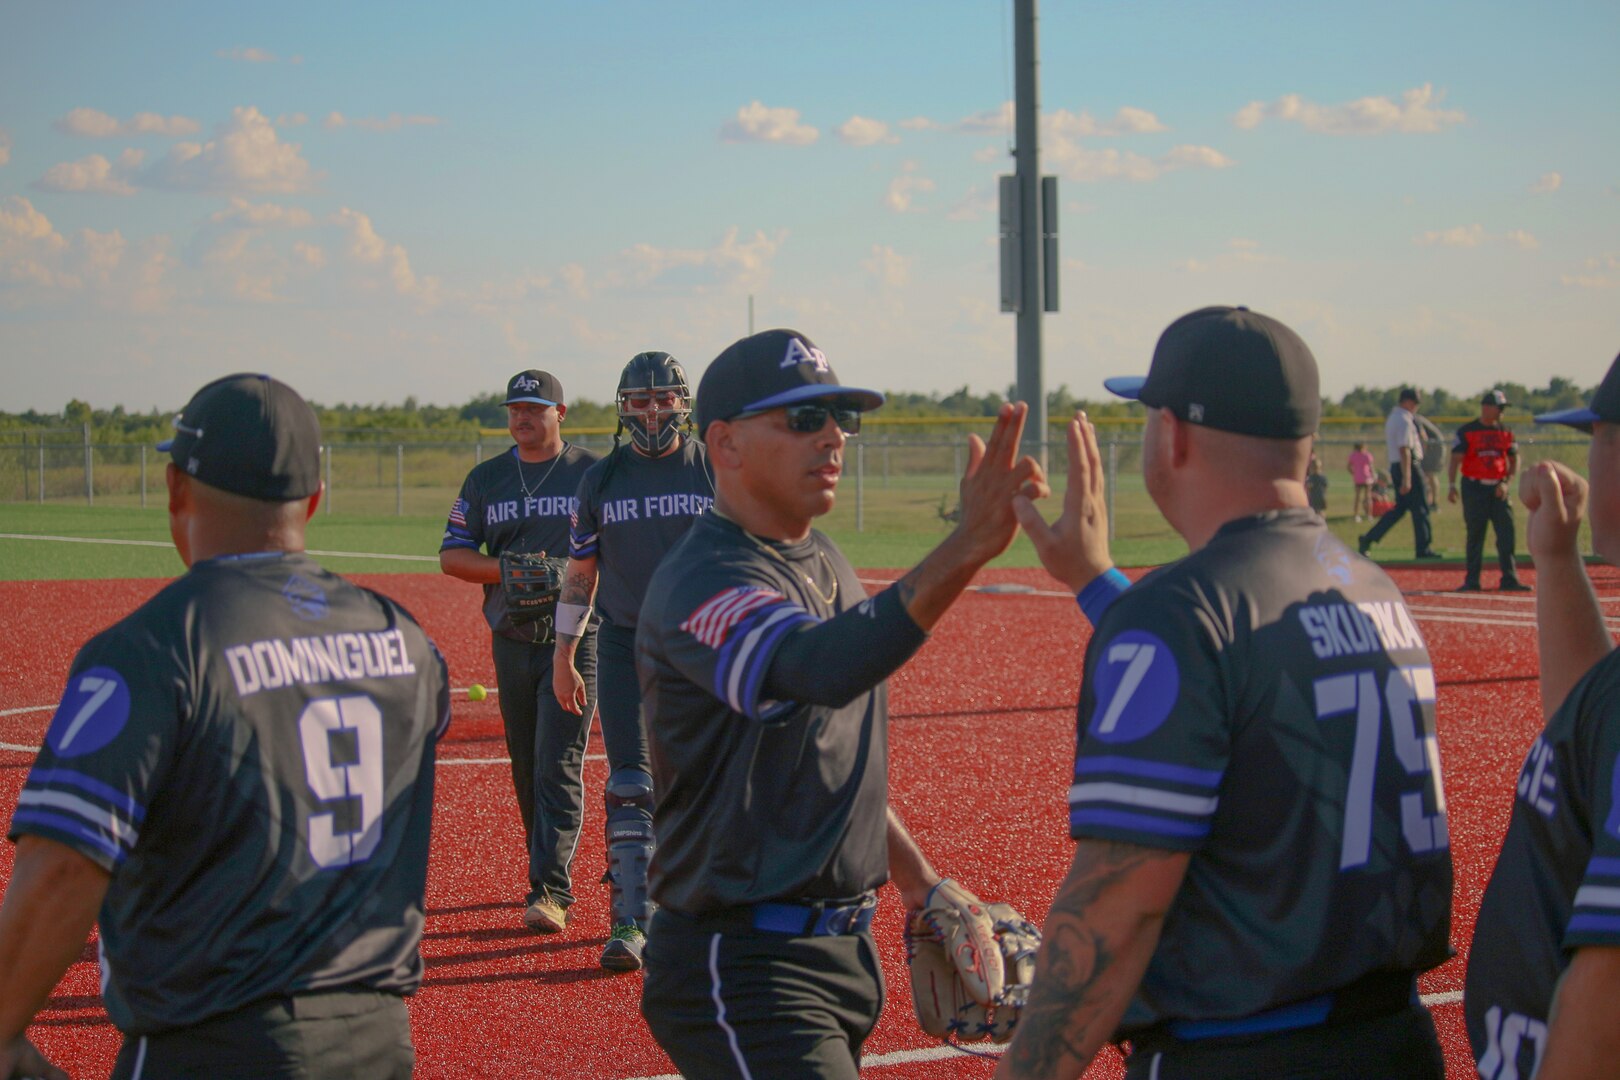 Air Force closes out day two with a victory over Marine Corps in the 2022 Armed Forces Sports Men's Softball Championship hosted by Army at Fort Sill, Okla.  Championship features teams from the Army, Marine Corps, Navy, and Air Force.